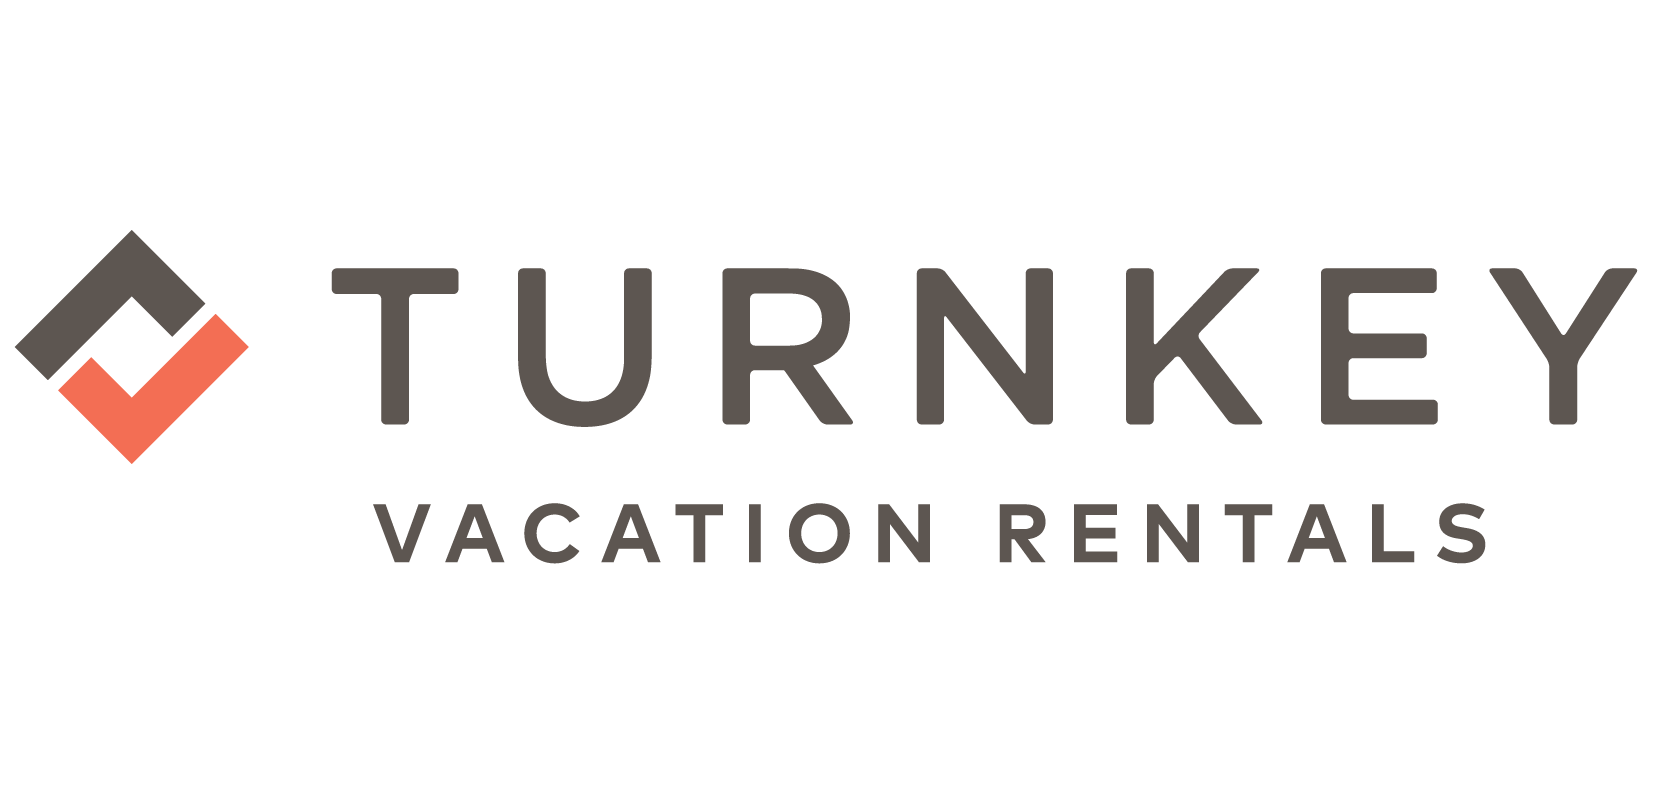 Vacation Logo - TurnKey Vacation Rentals | Premier Homes & Property Management